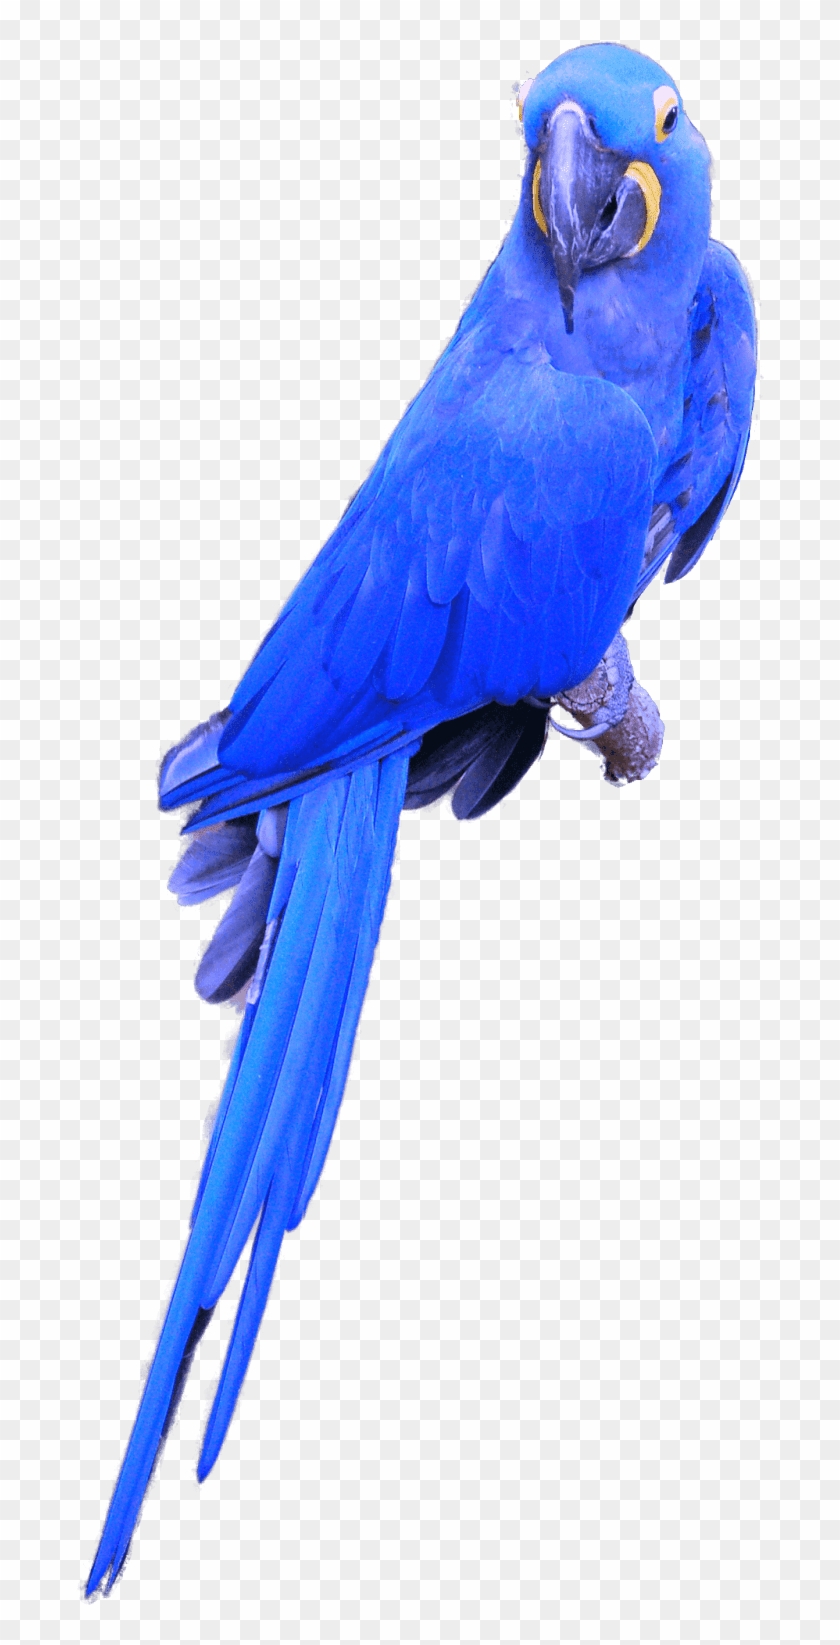 Parrot Png Image And Clipart Transparent Background - Hyacinth Macaw Transparent Background #3077201